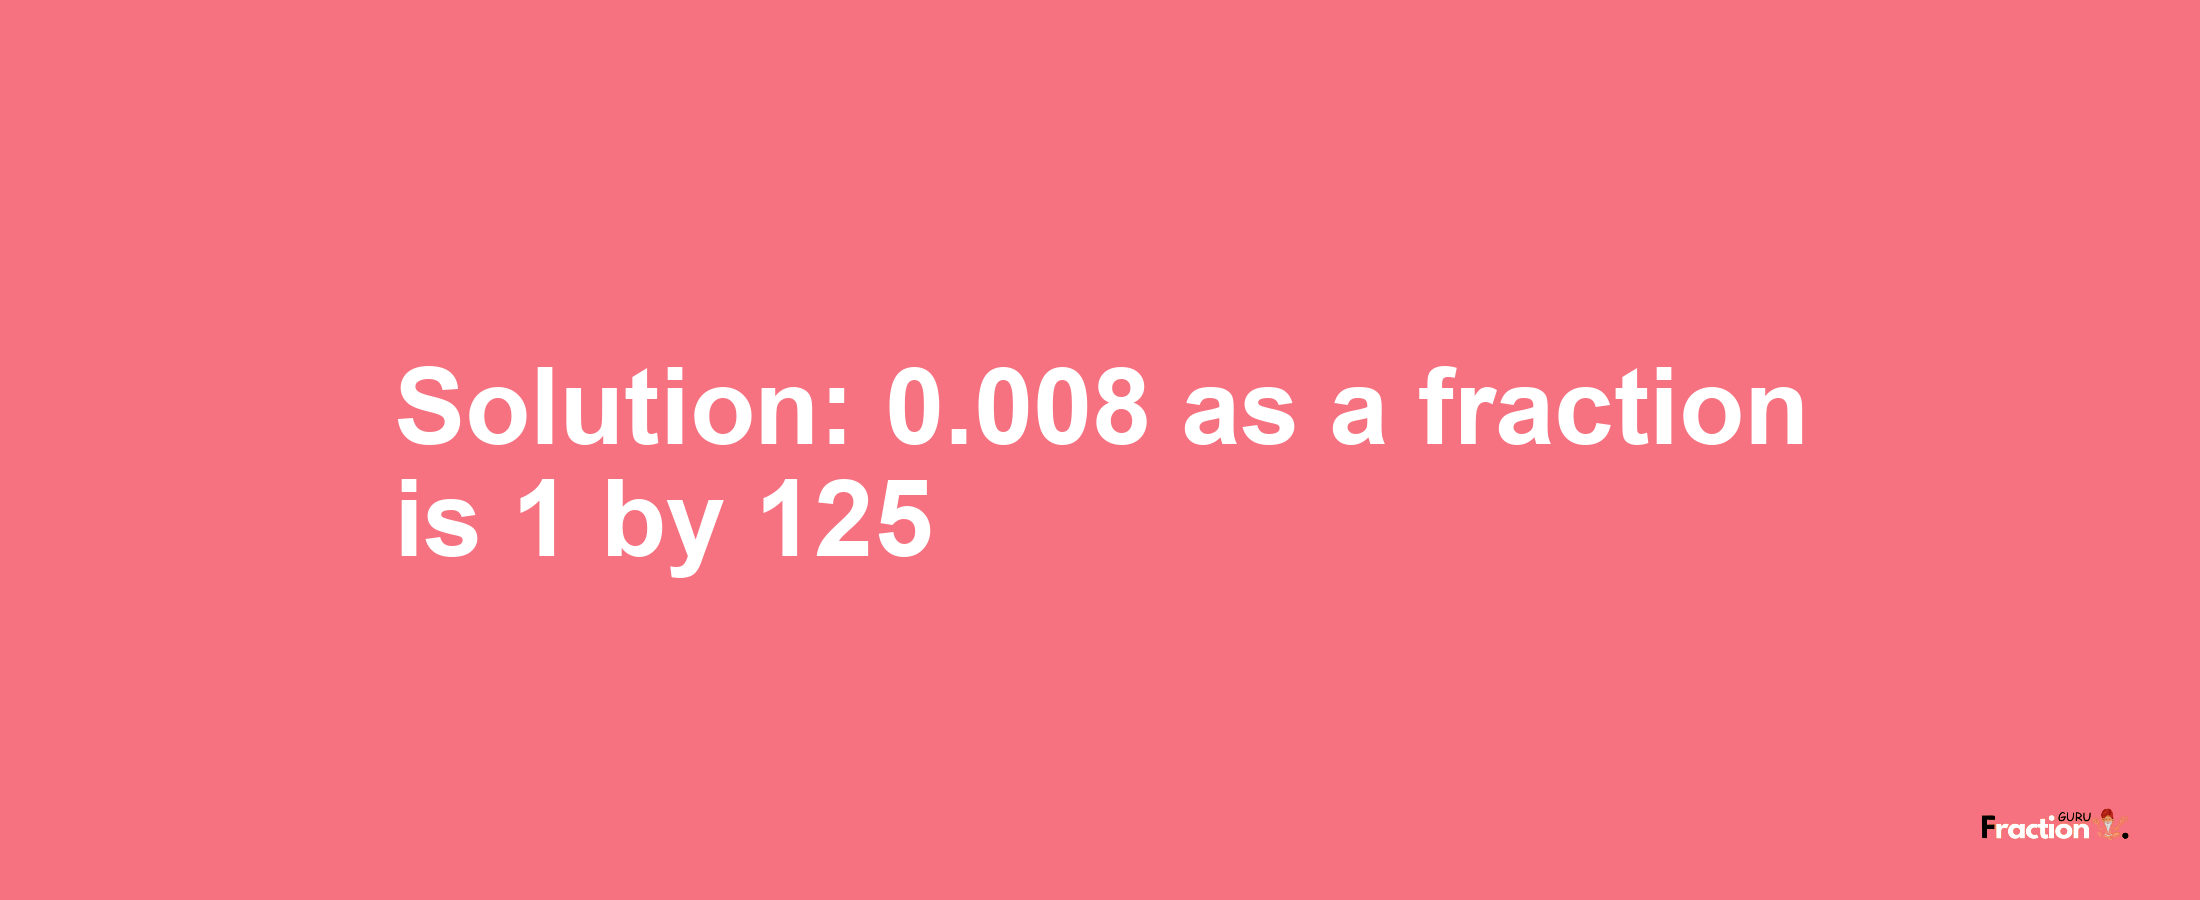 Solution:0.008 as a fraction is 1/125